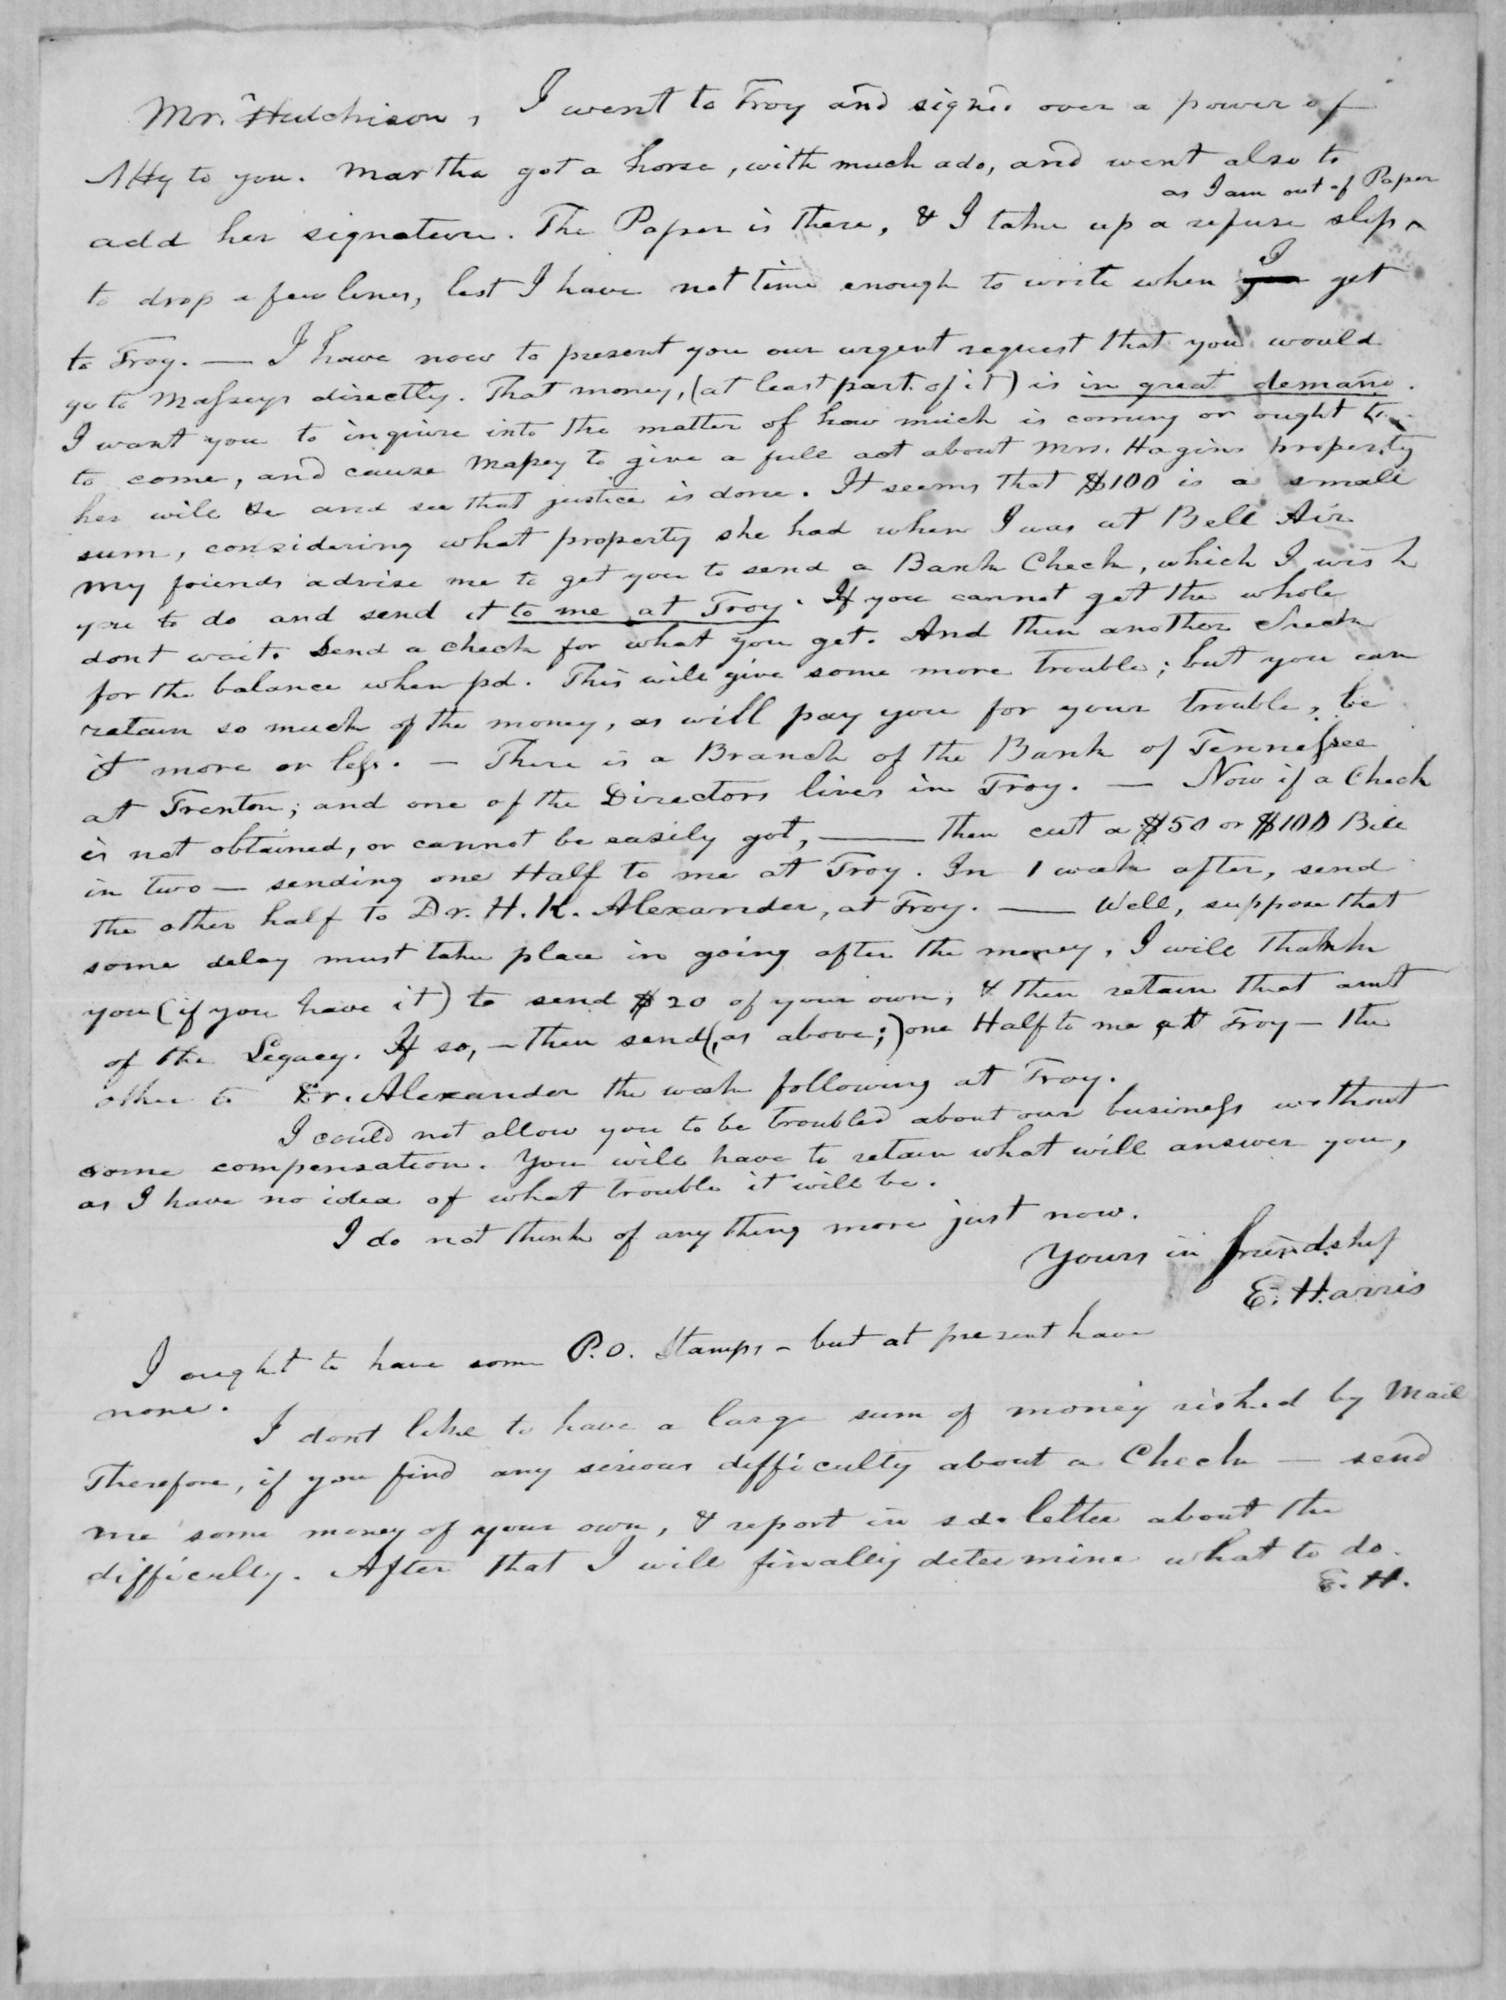 Letter dated July 1, 1854 from H. K. Alexander of Troy, Tennessee.  Rev. E. Harris requested him to write.  He mentions Mrs. Hart and Hugh Campbell.